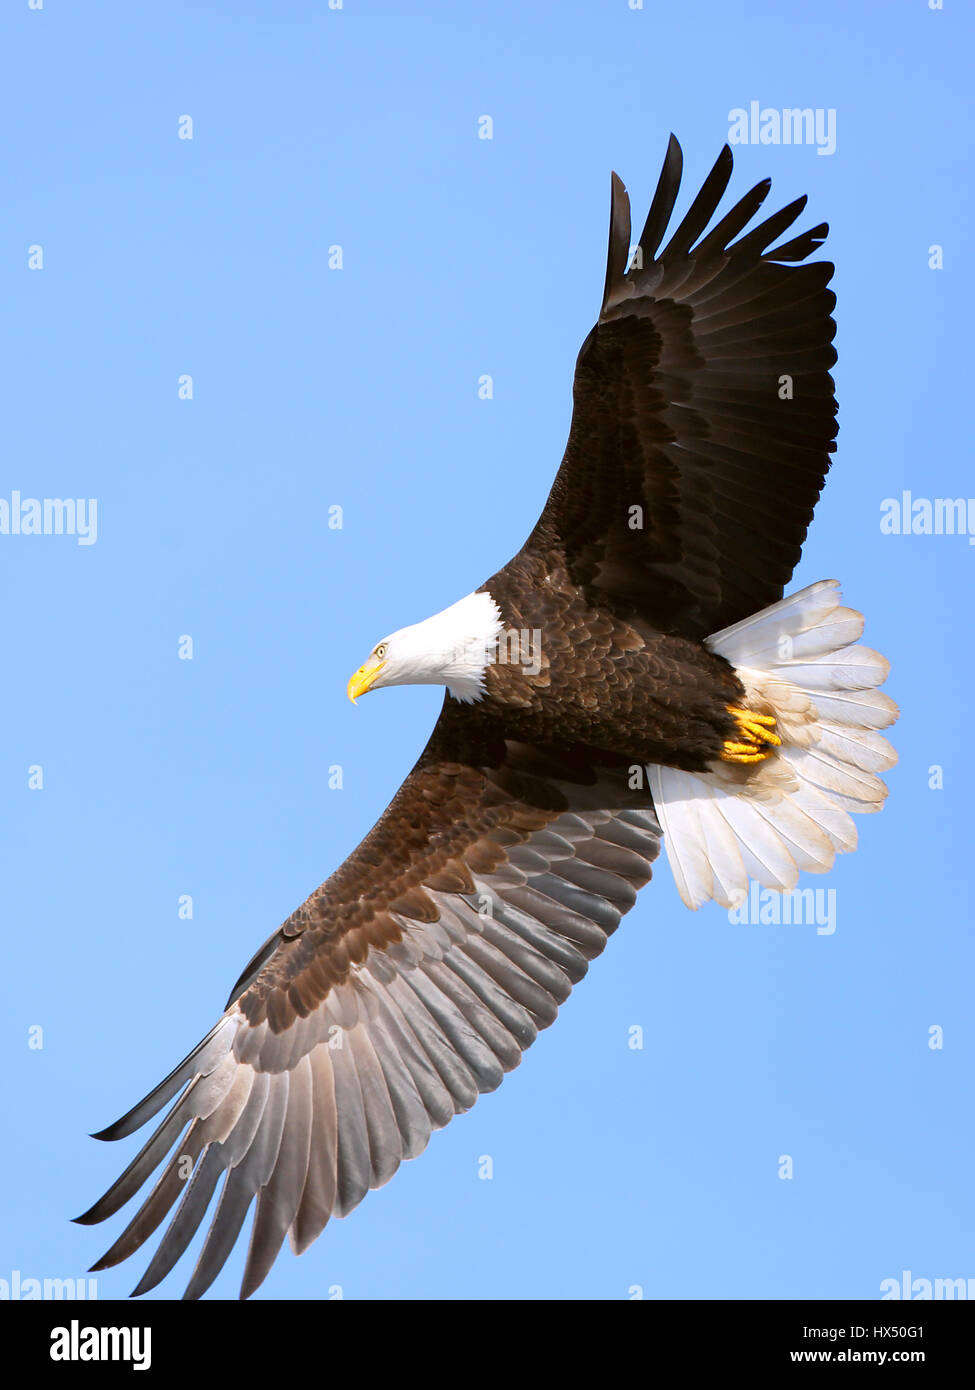 Close up of mature Bald eagle soaring in blue sky Stock Photo